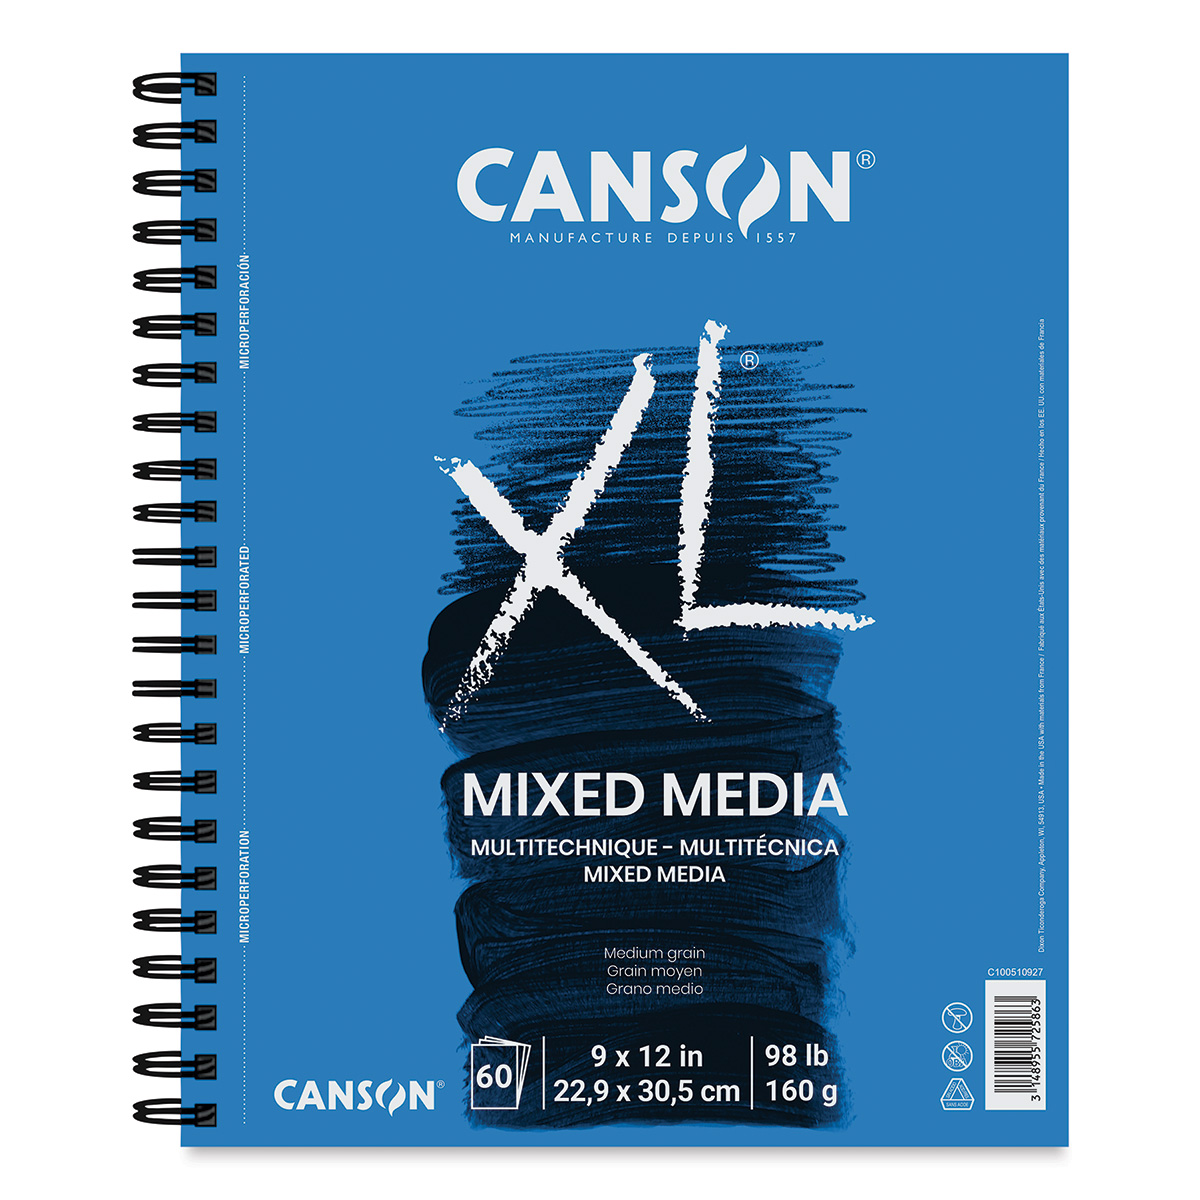 REVIEW: Canson XL Mix Media Sketch Pad 9 x 12 